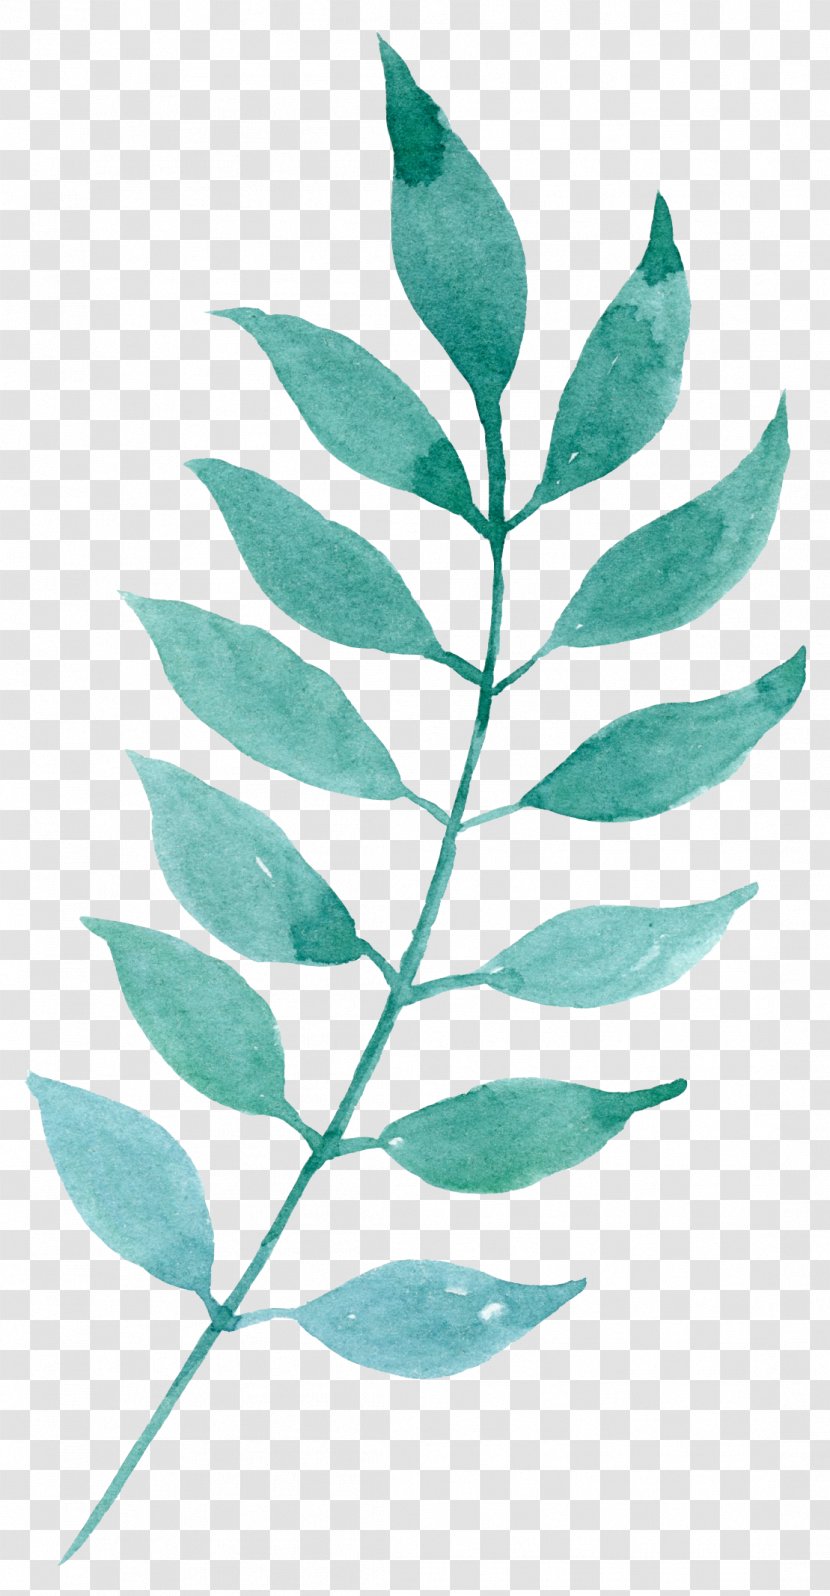 Watercolor Painting Download Leaf - Tree - Hand-painted Mint Green Leaves Transparent PNG